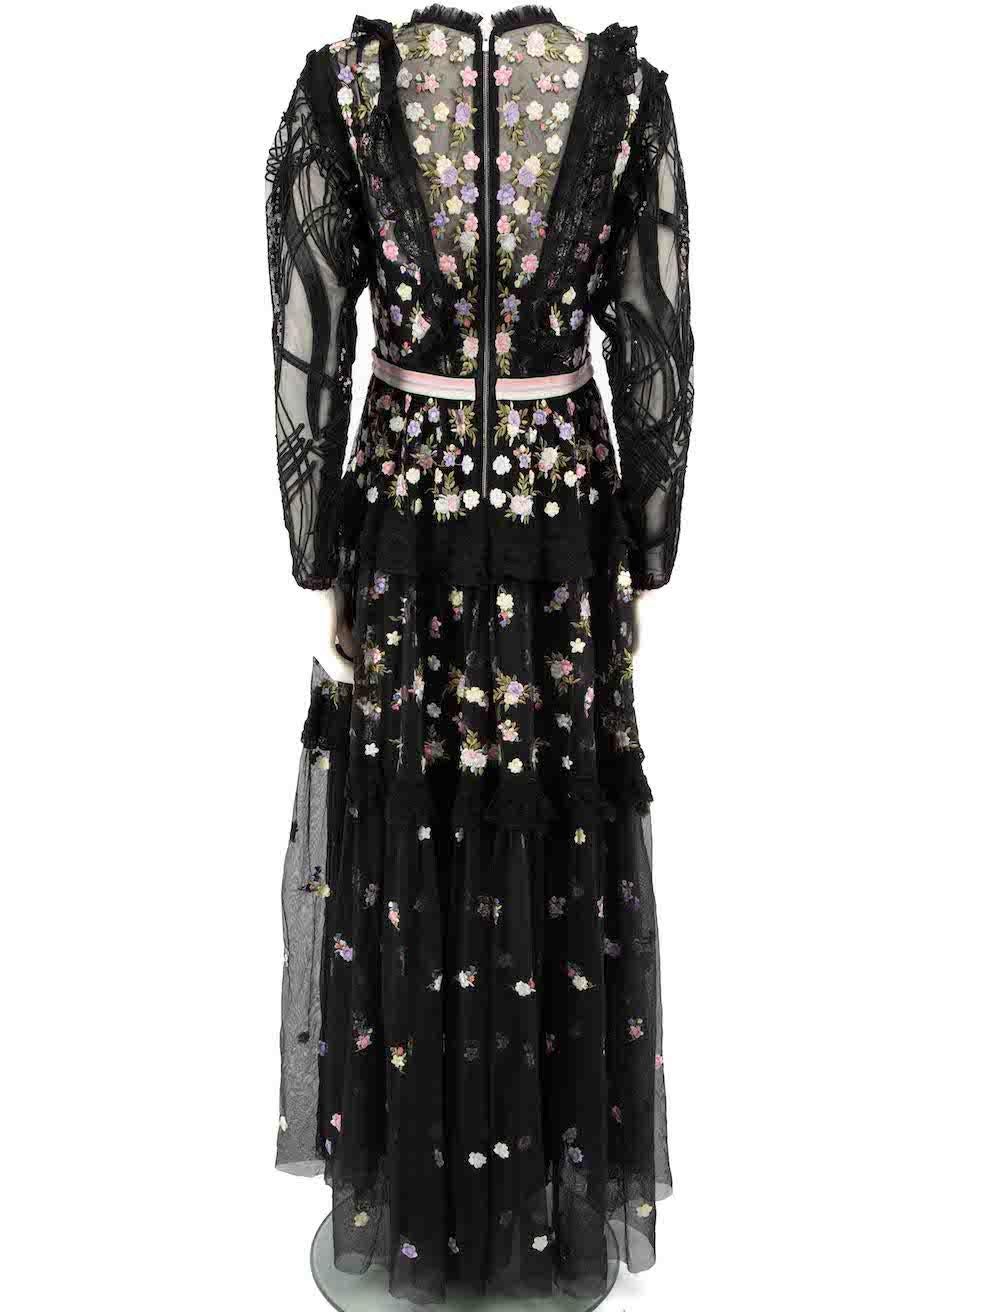 Needle & Thread Black Floral Embroidery Maxi Dress Size M In Good Condition For Sale In London, GB